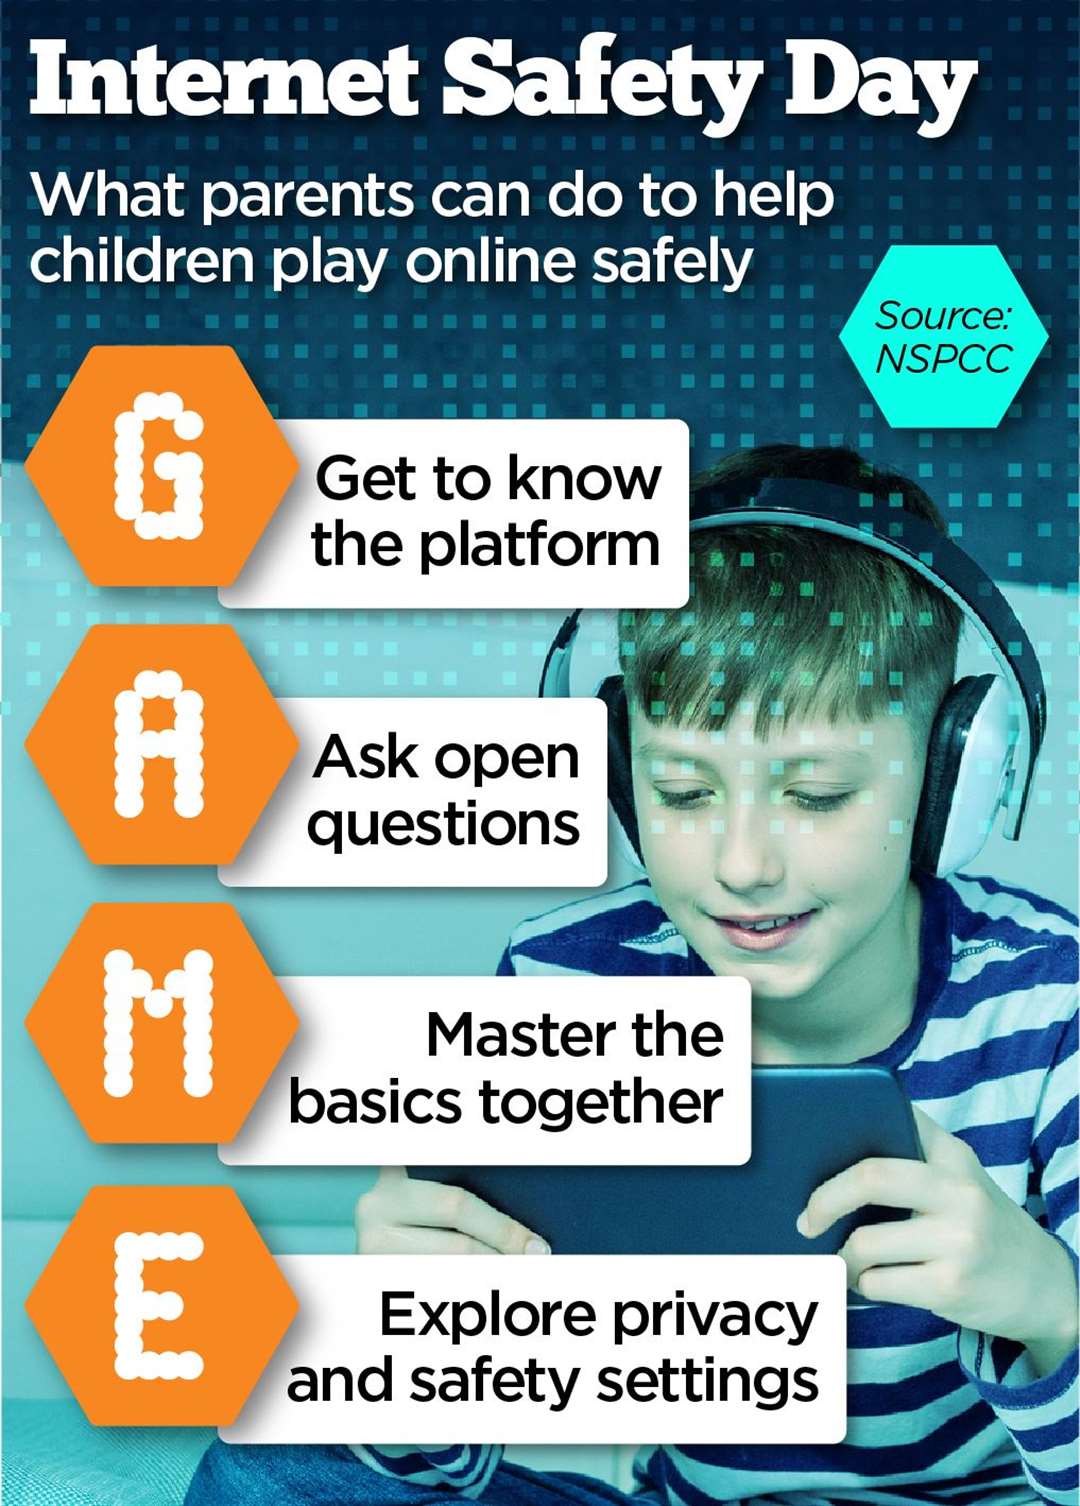 On Internet Safety Day the NSPCC is encouraging parents to understand the games their children play